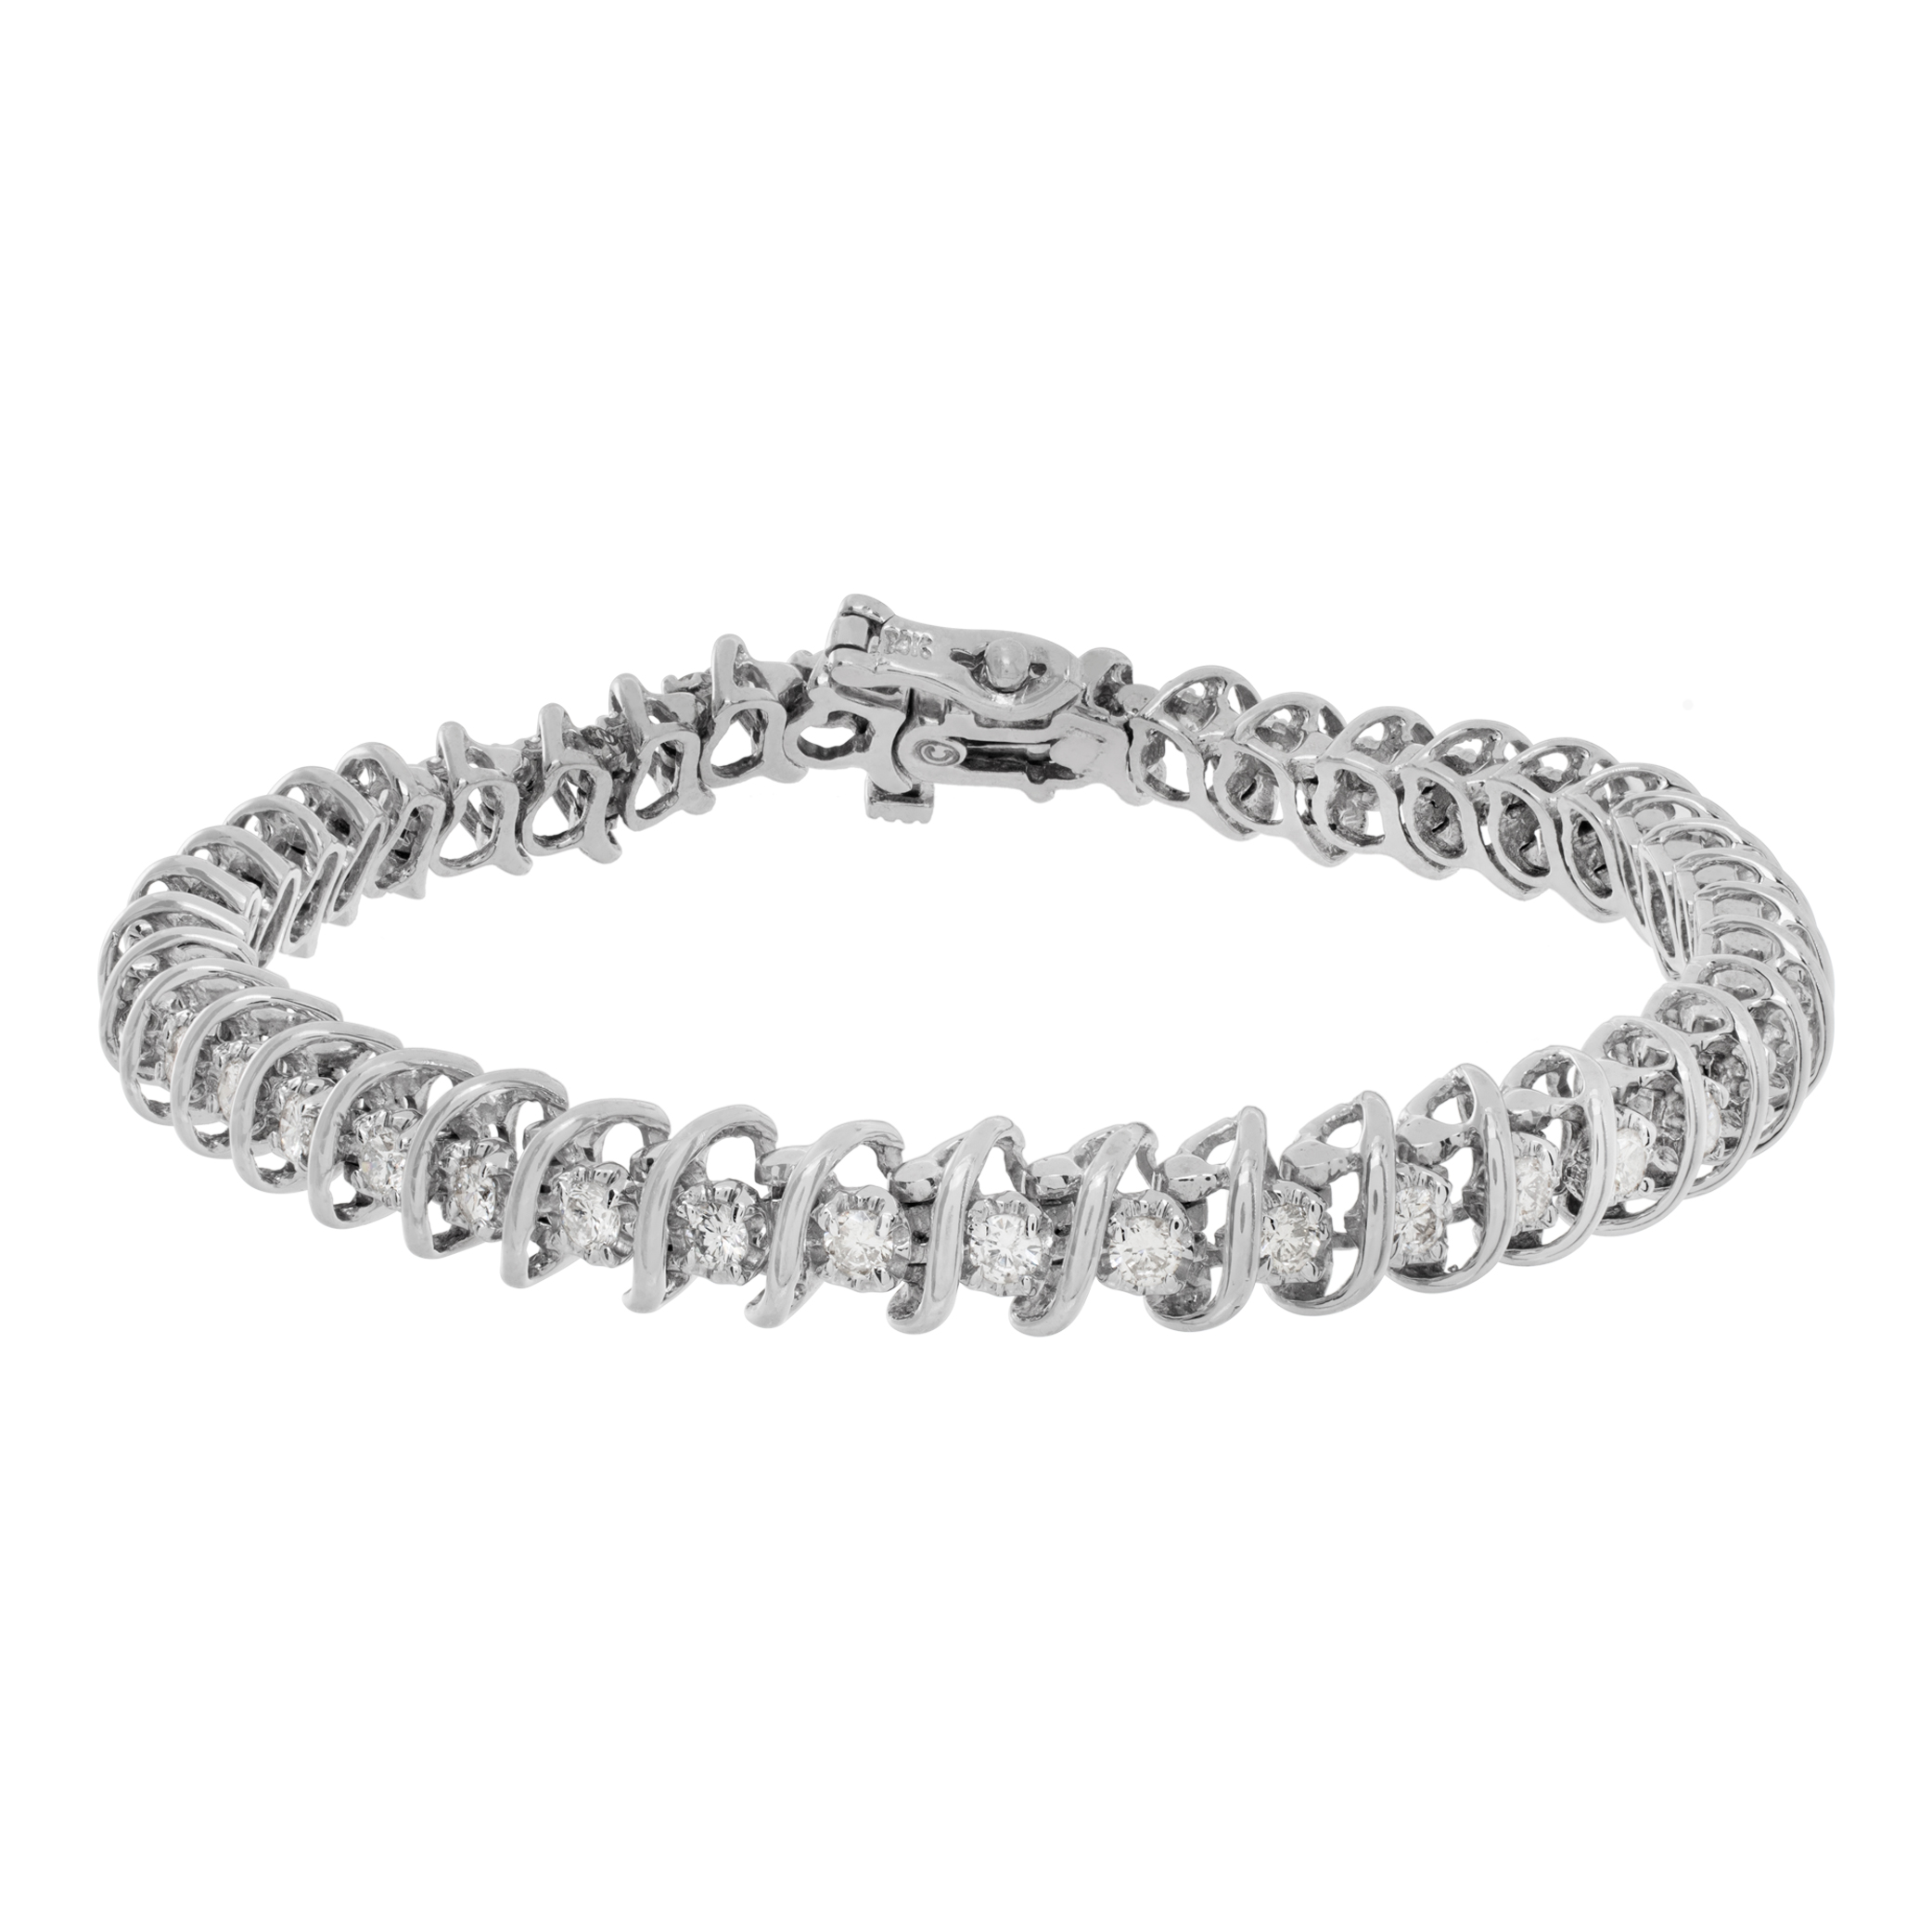 Diamond line bracelet in 14k white gold with approximately 2 carats in round diamonds H-I Color, SI2 Clarity. Length 7.25 inches. (Stones) image 1